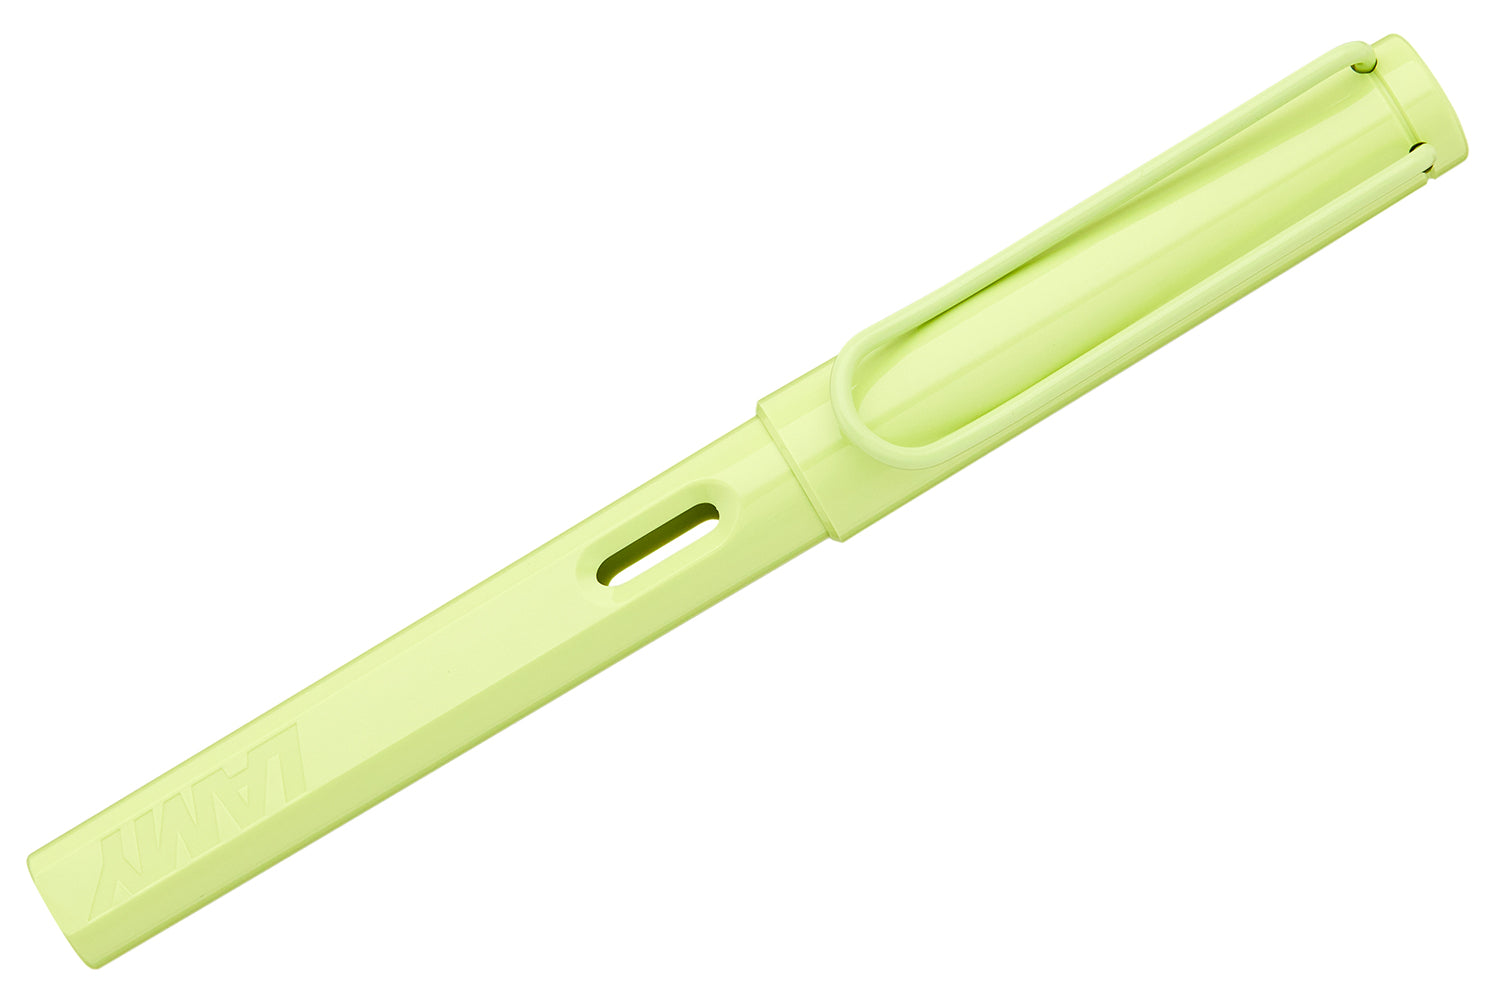 Squishy Grip Shimmery Lime MINI Pencil Grip Interchangeable